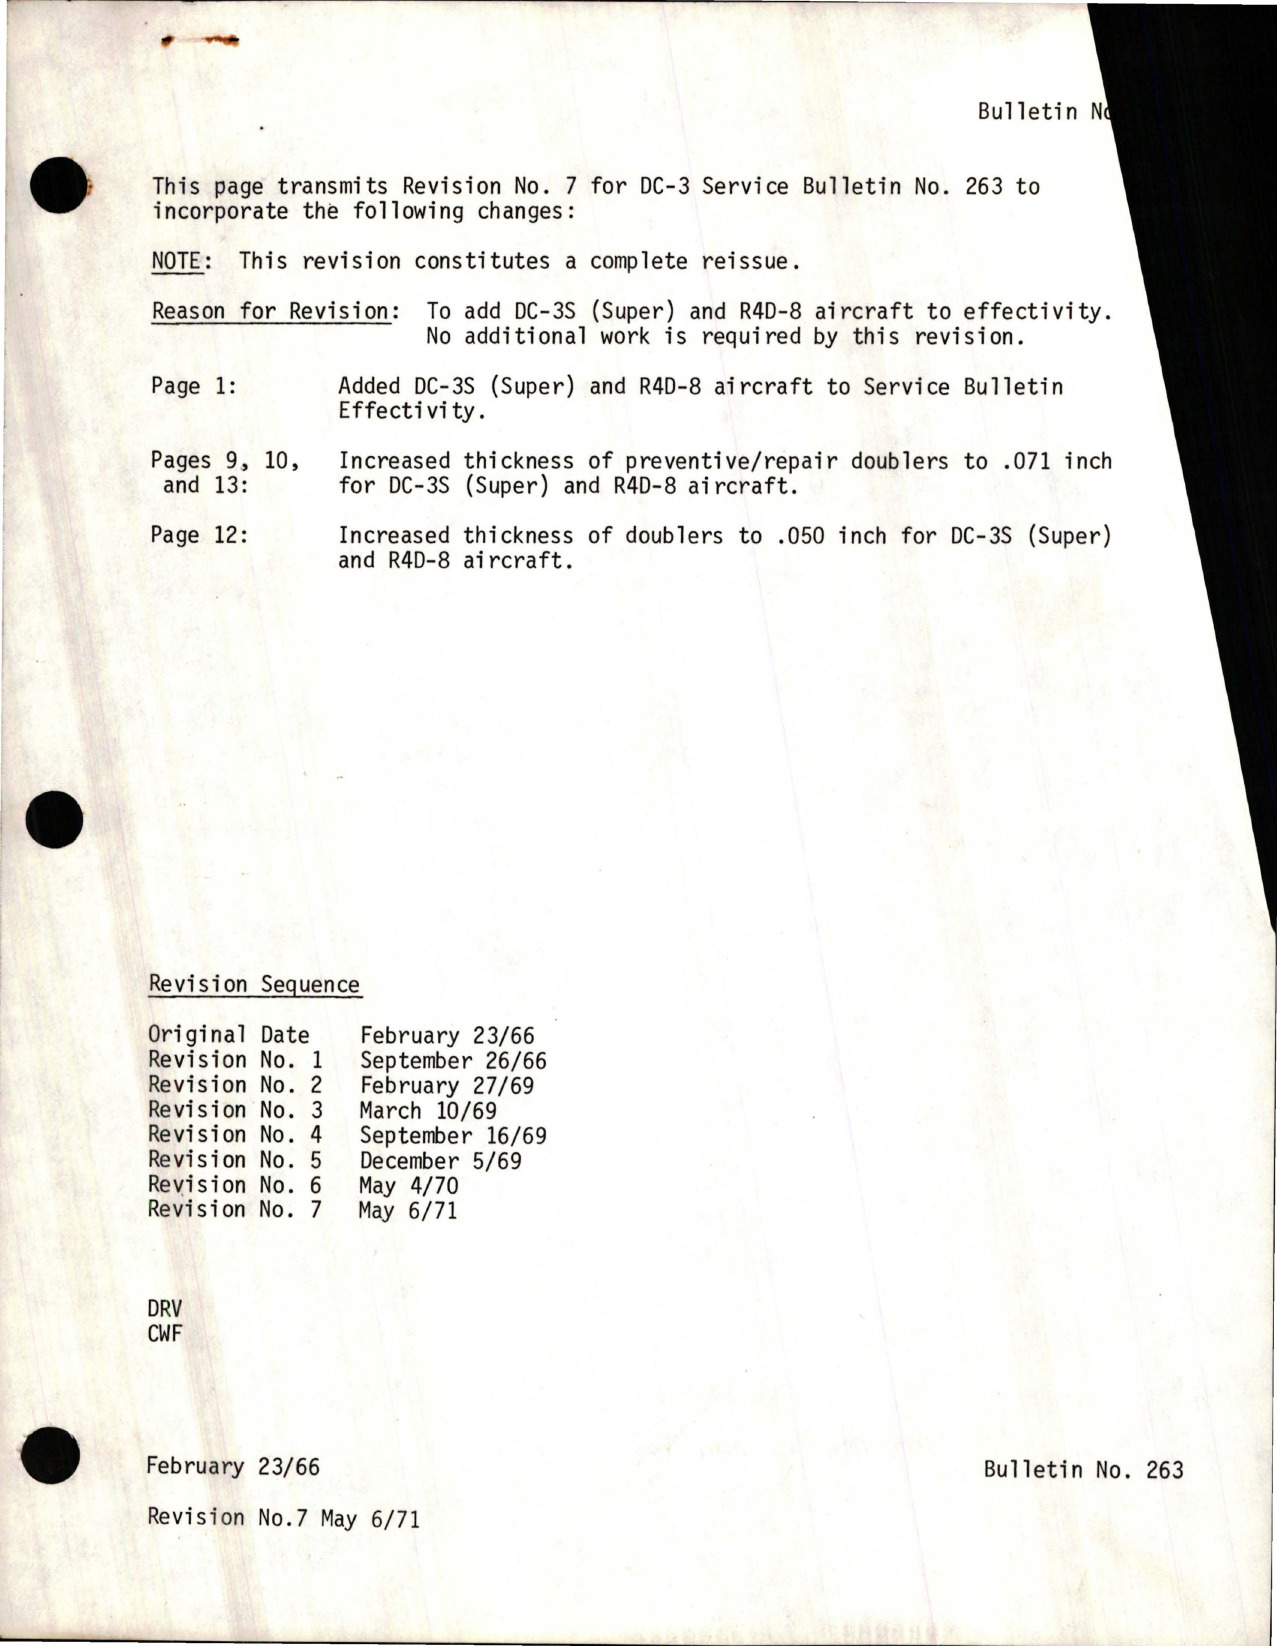 Sample page 1 from AirCorps Library document: Revision No. 7 to Bulletin No. 263 for DC-3, To add to DC-3S & R4D-8 Effectivity